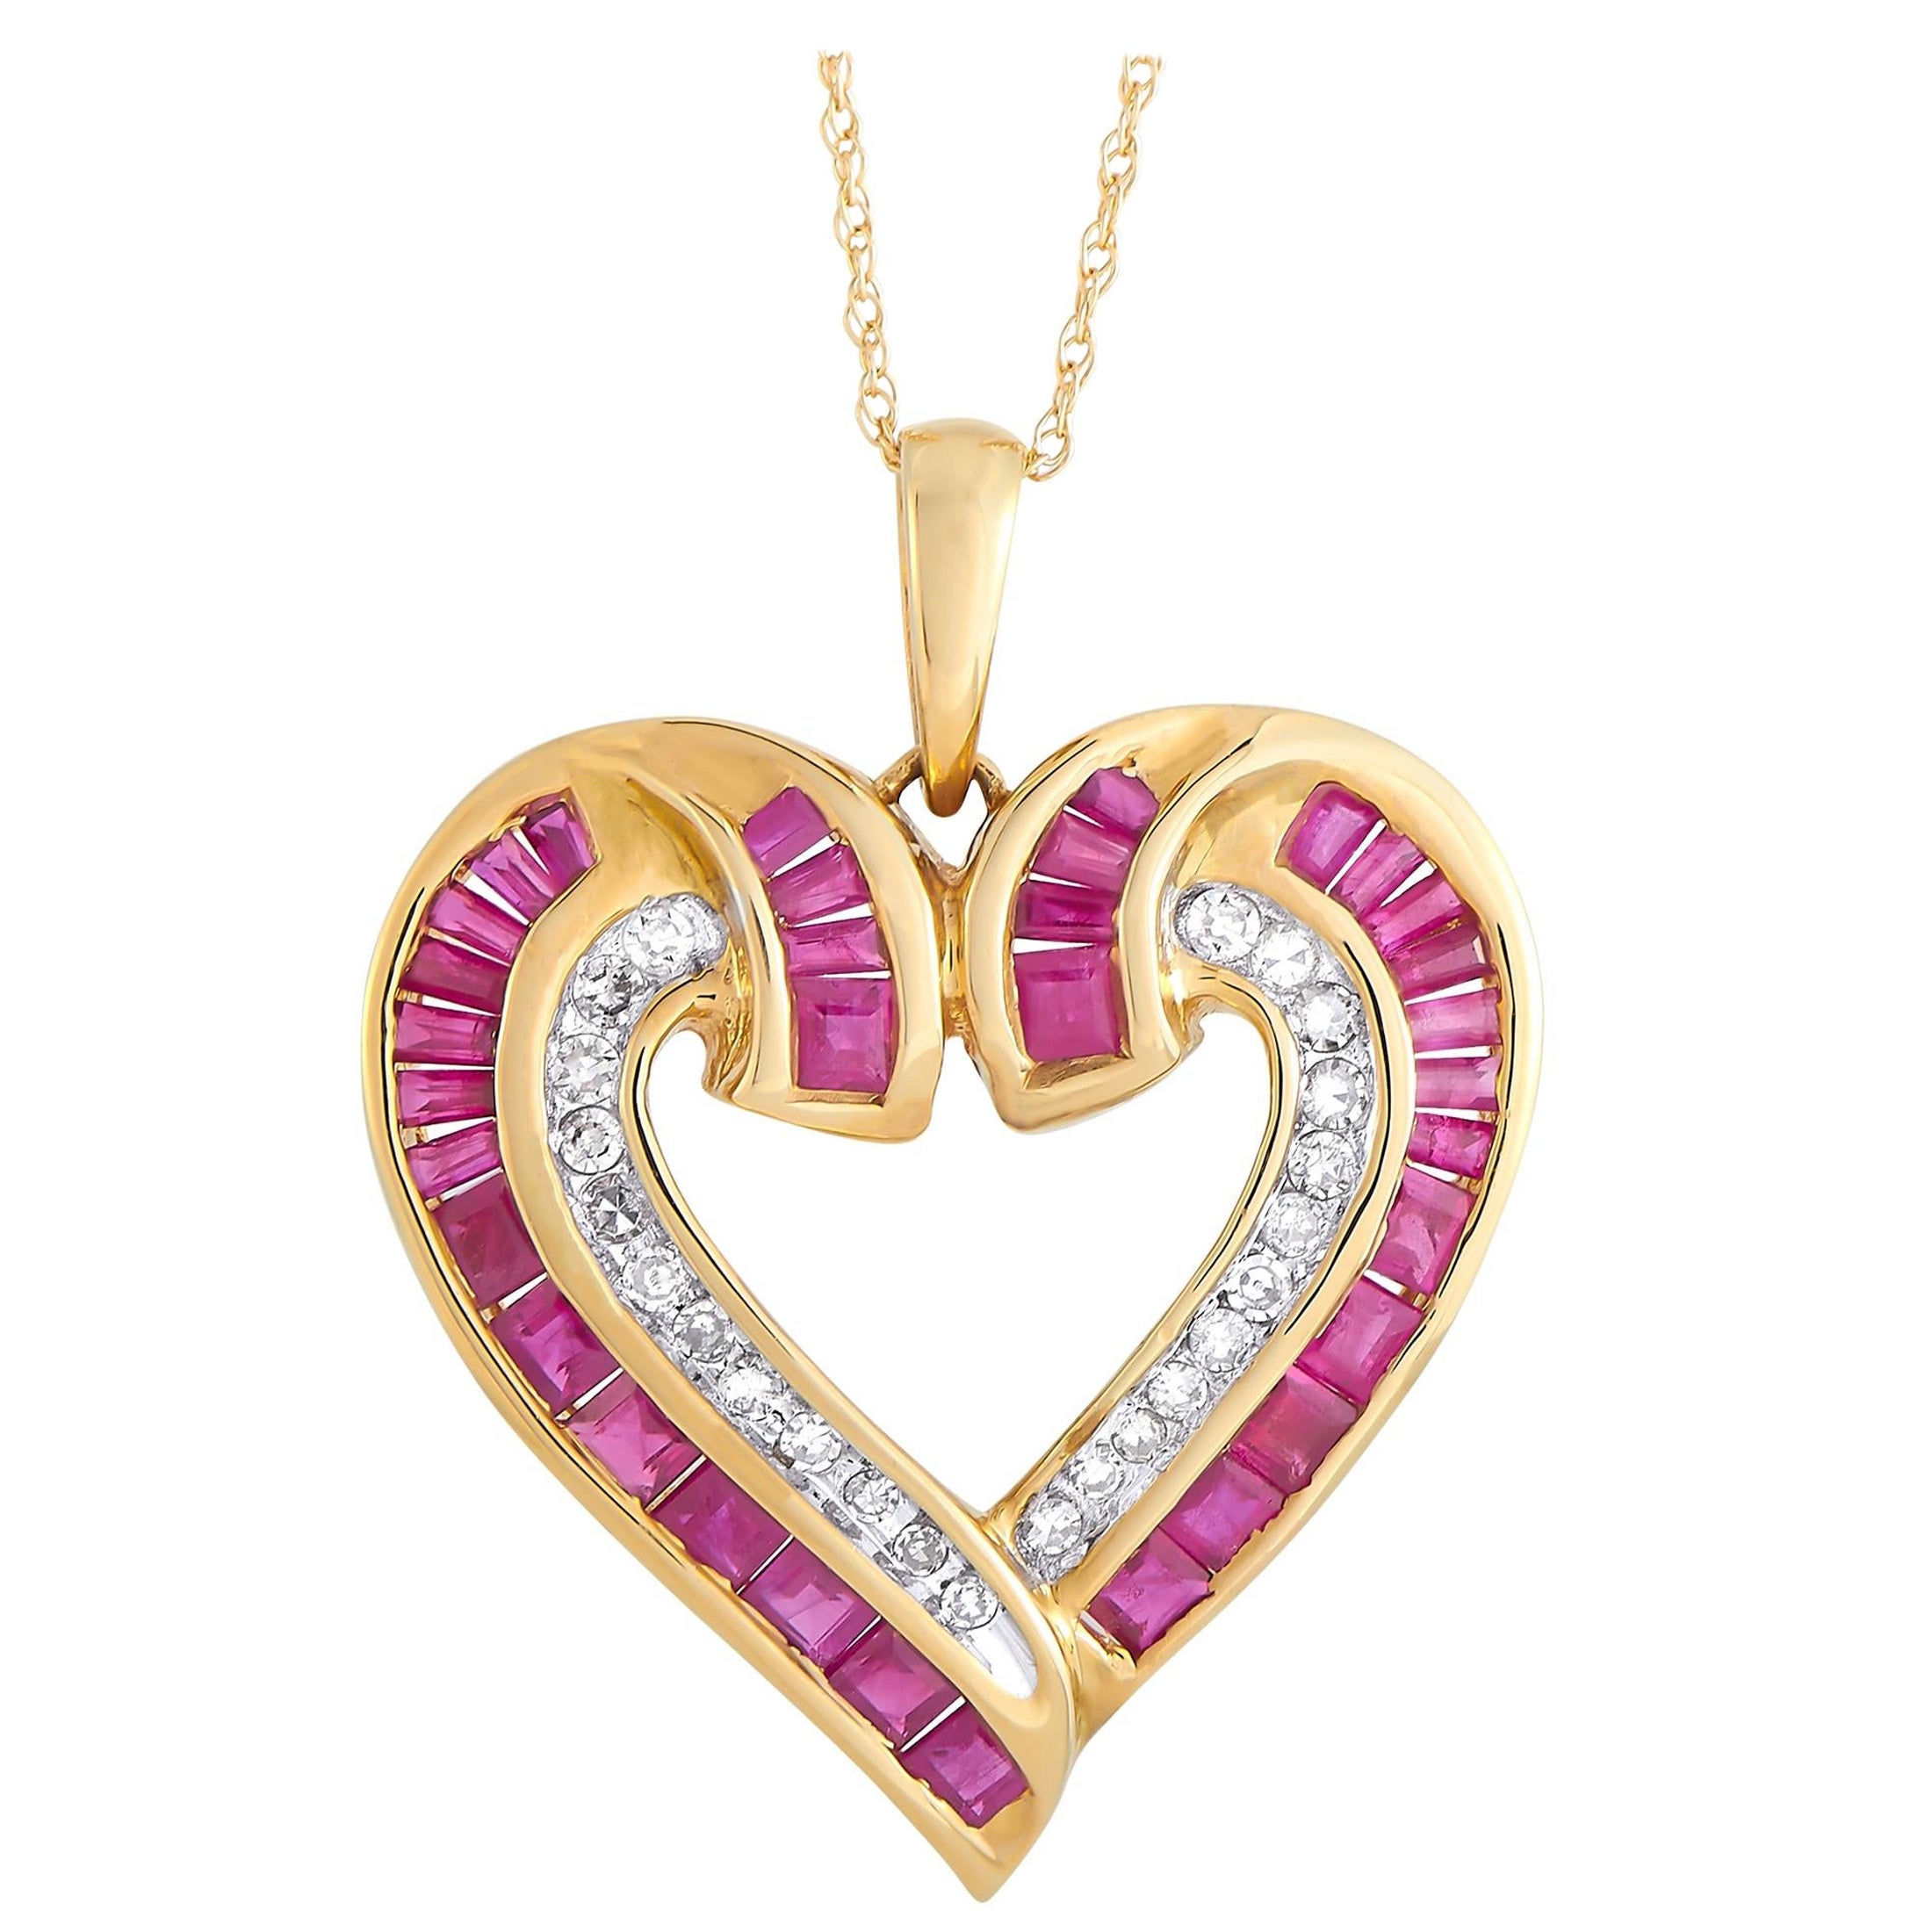 LB Exclusive14K Yellow Gold 0.16 Ct Diamond Ruby Heart Pendant Necklace